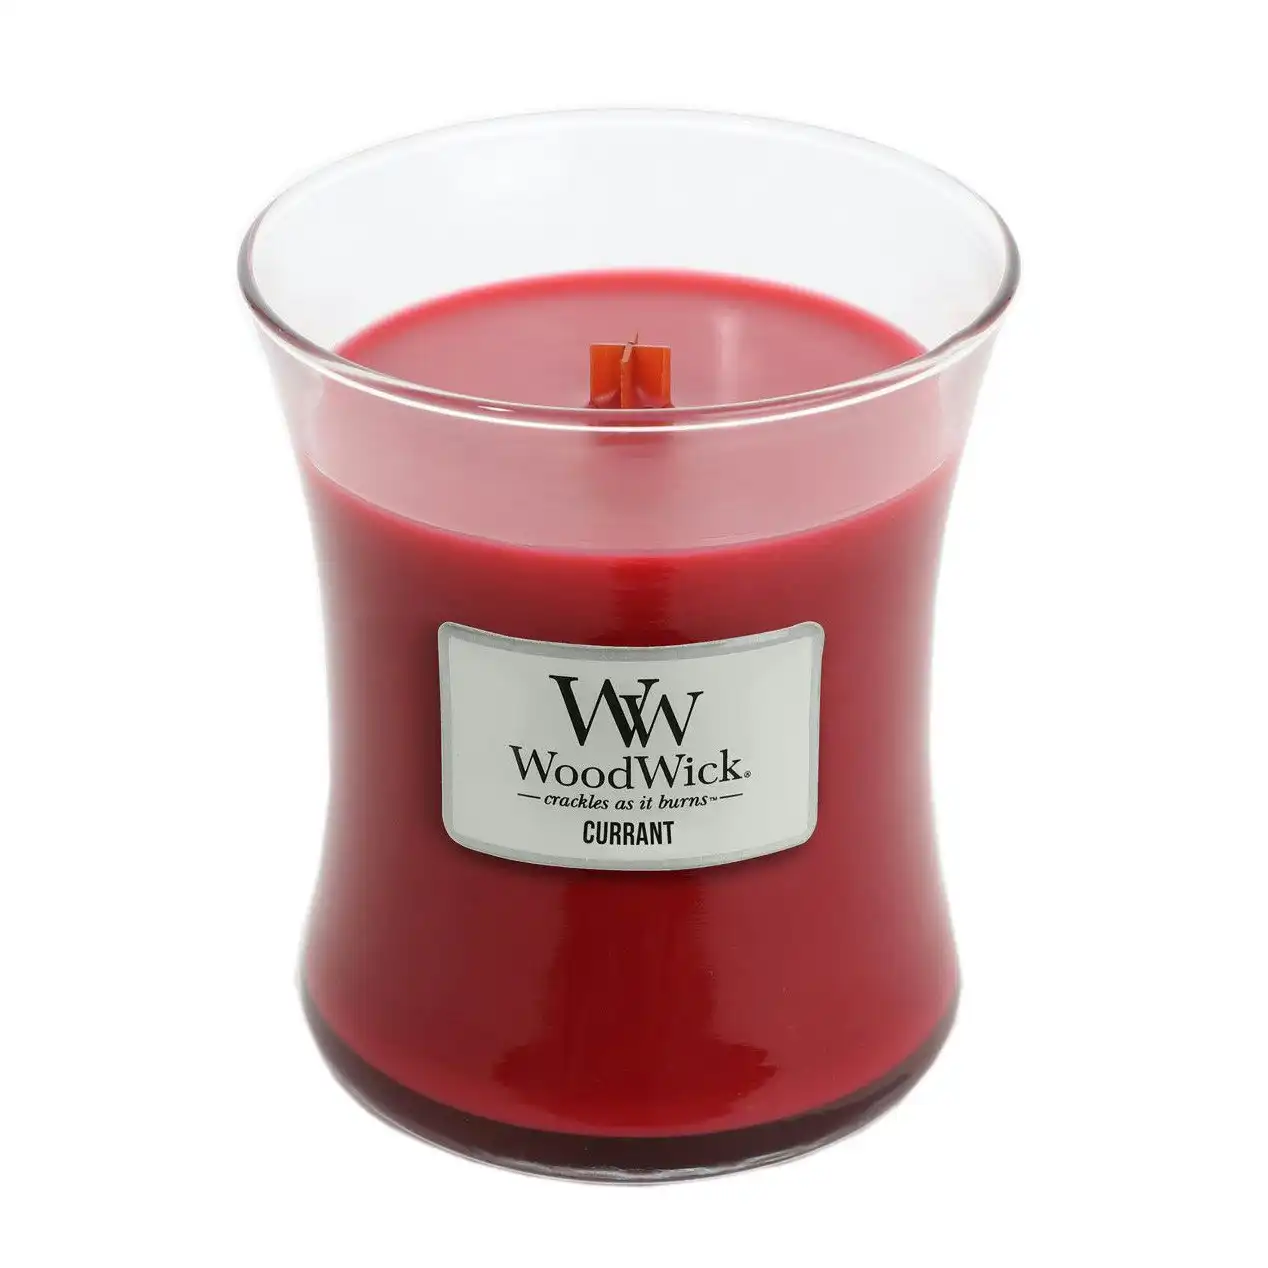 WoodWick Medium Currant Scented Candle